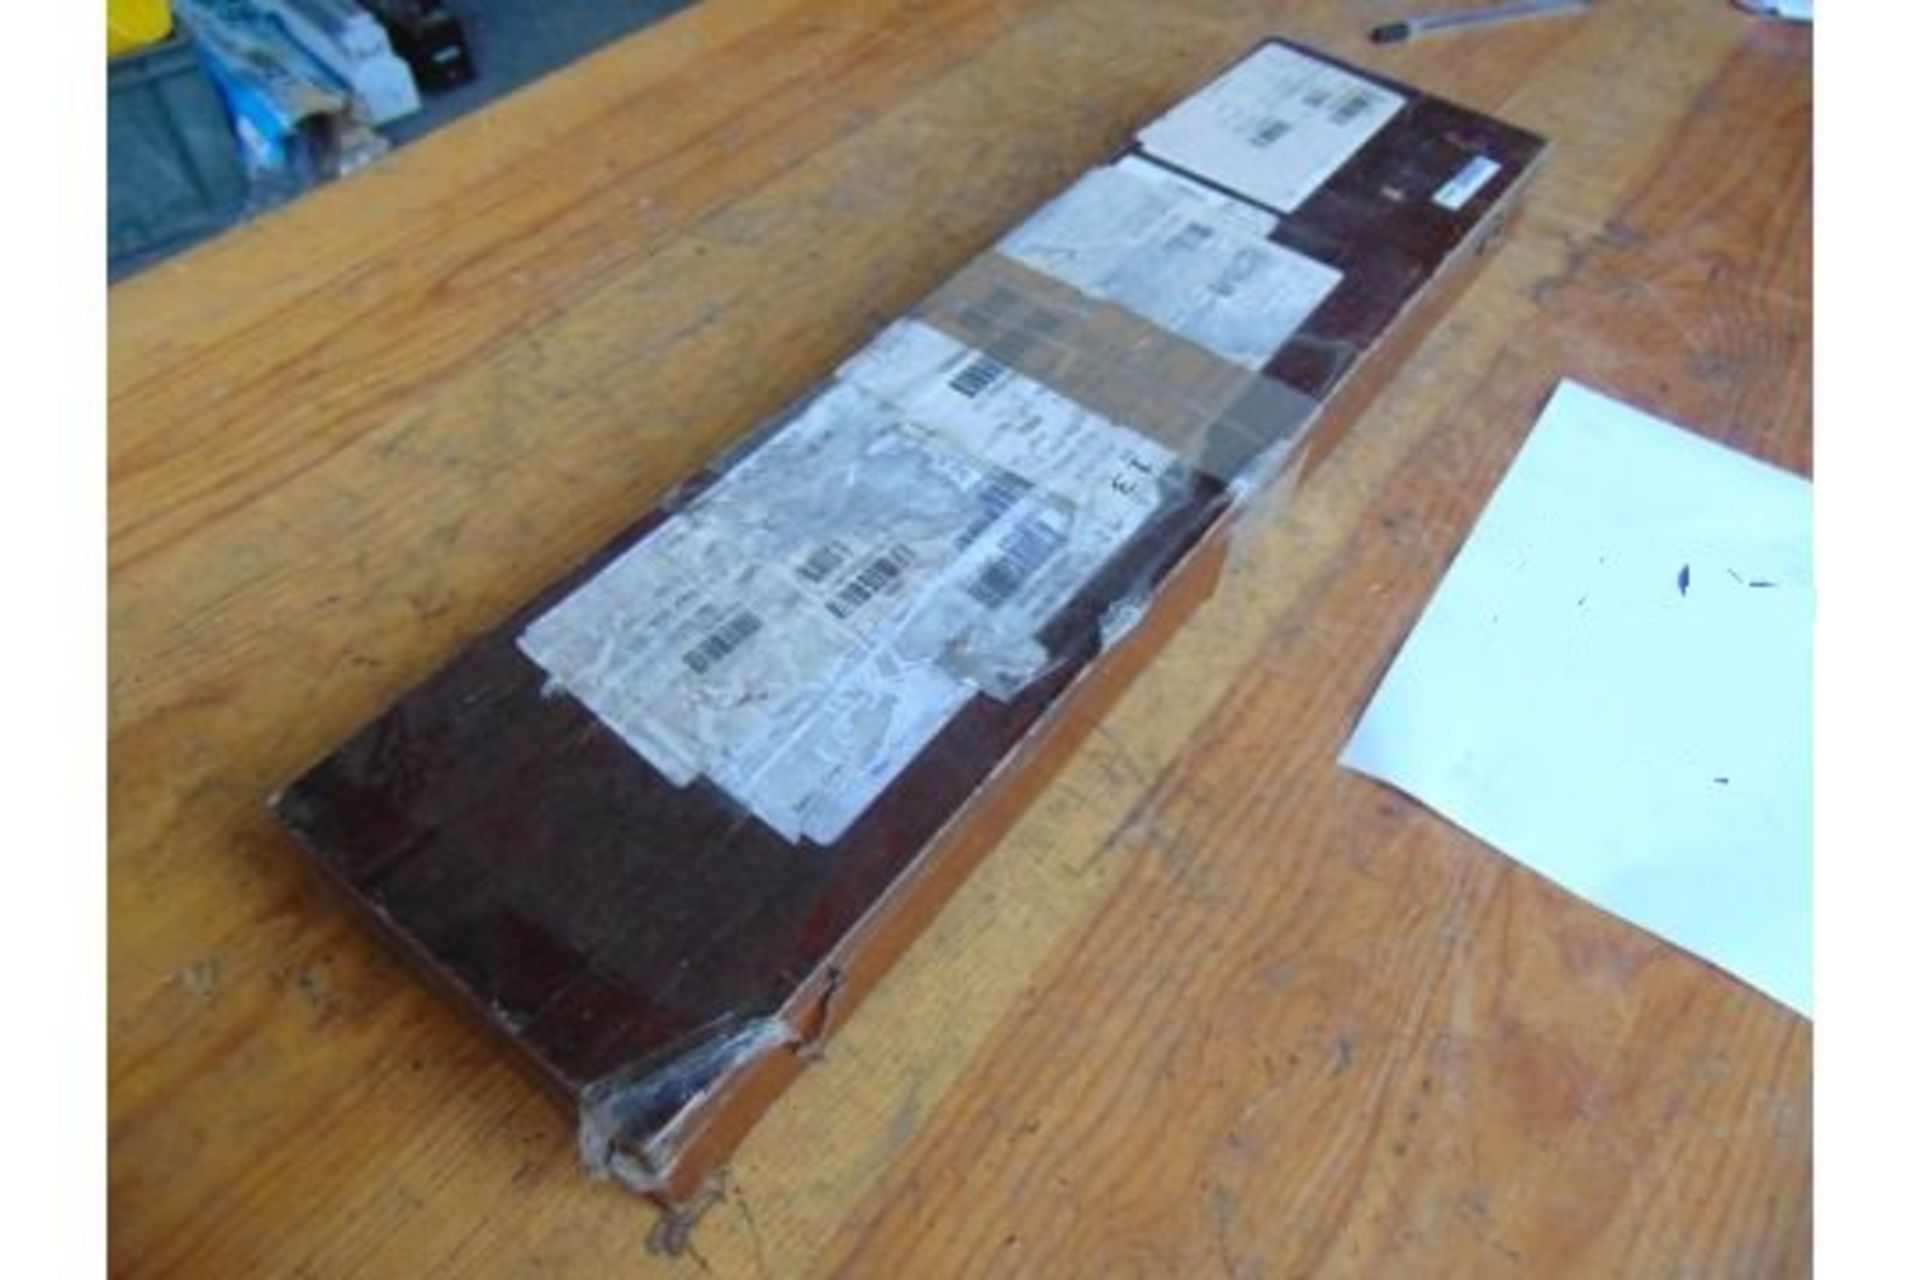 2 x Antique Parallel Navigation Rulers in Original Wooden Box - Image 6 of 6